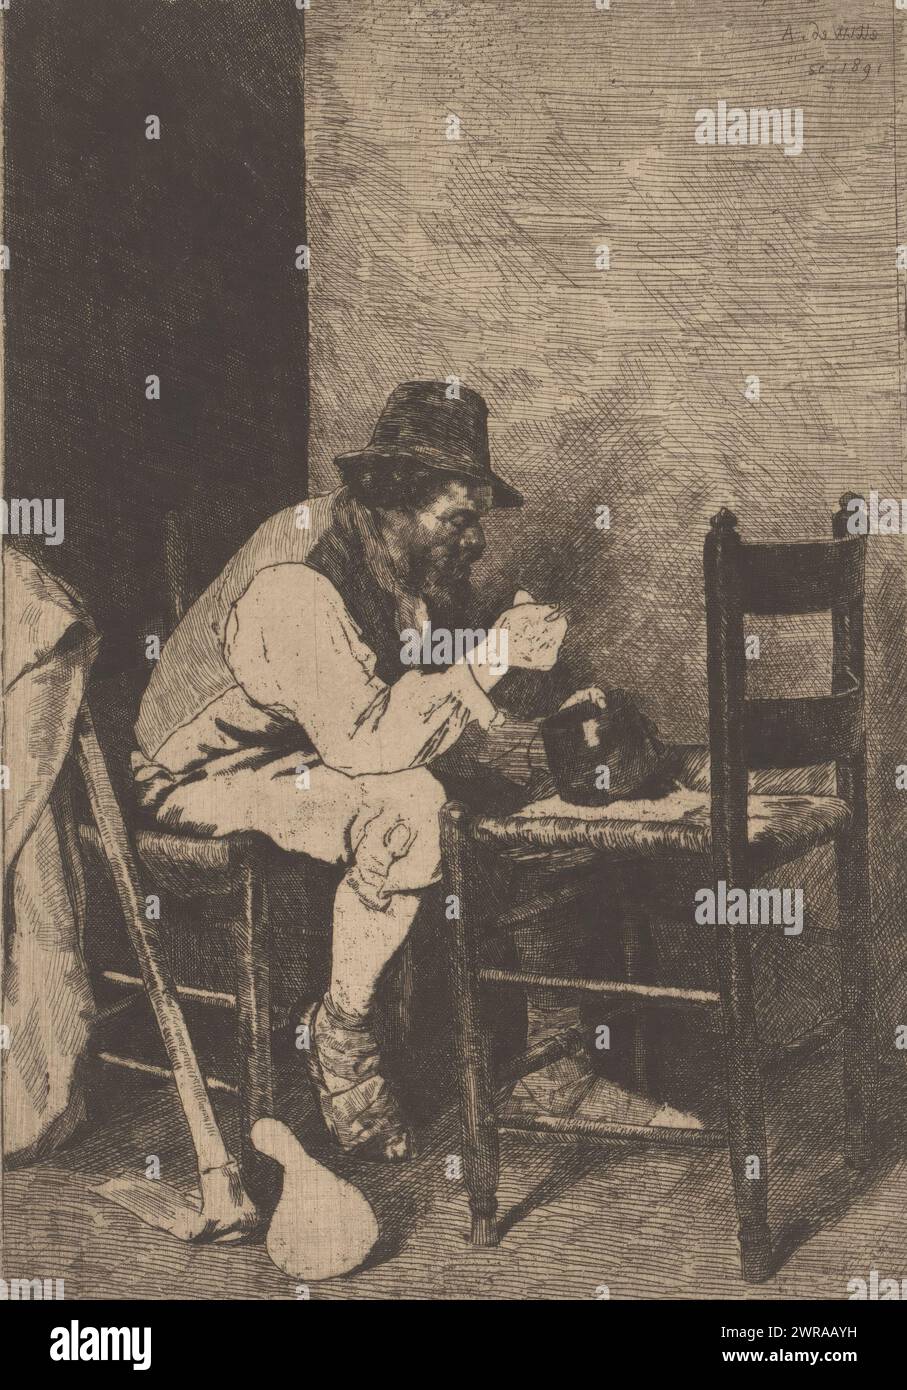 Man in hat eats from a cauldron on a chair, print maker: Adrien De Witte, 1891, paper, etching, height 218 mm × width 163 mm, print Stock Photo